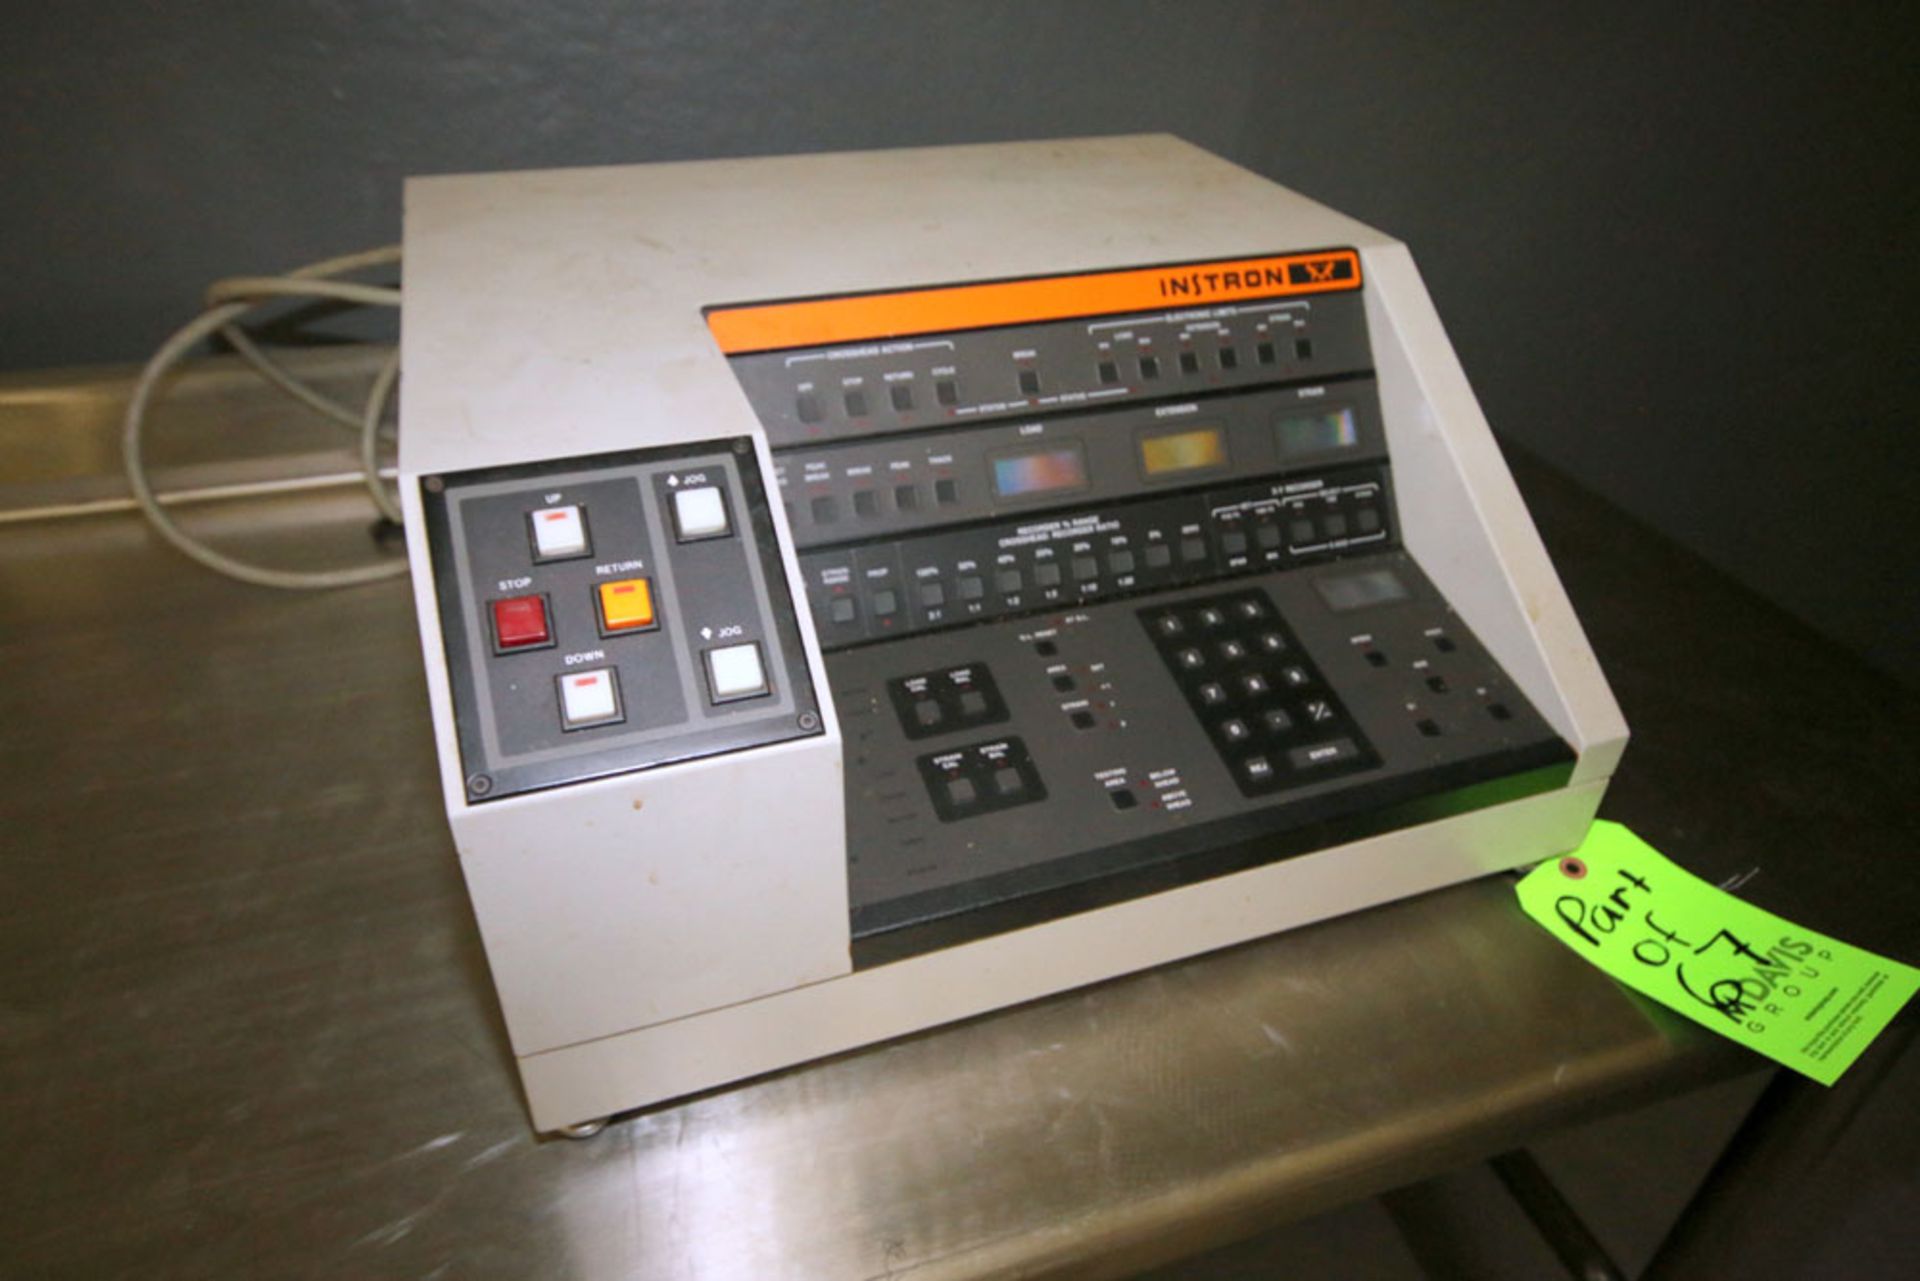 Instron Tensile Compression Tester, S/N 928, 2,000 Tension Load, with Data Recording Computer - Image 3 of 3